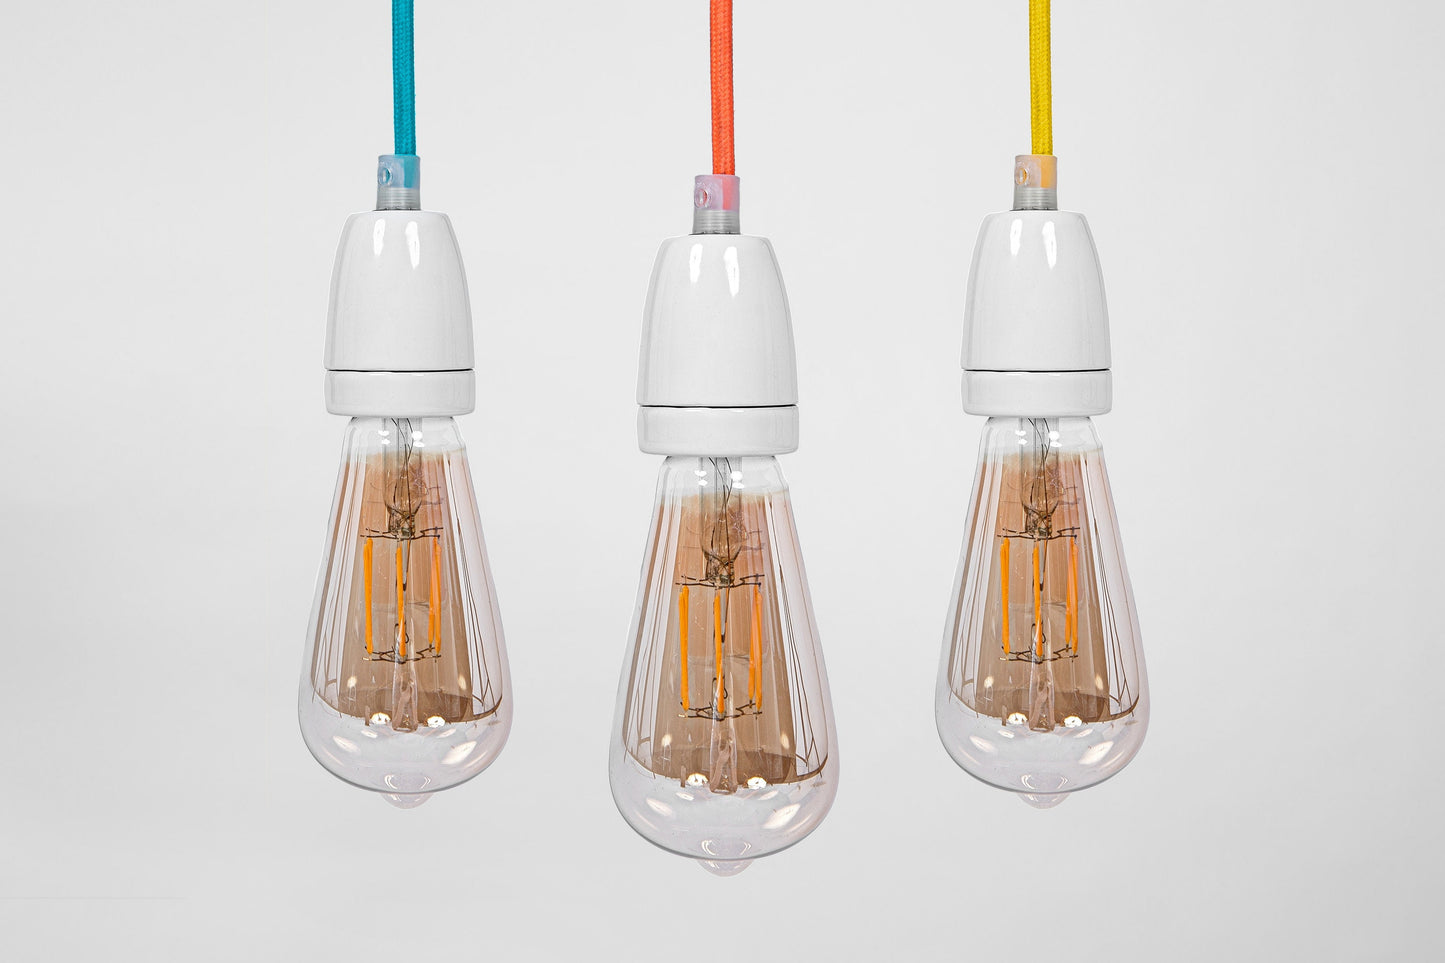 Oscar - Retro Vintage pendant lamp made of ceramic and textile cable